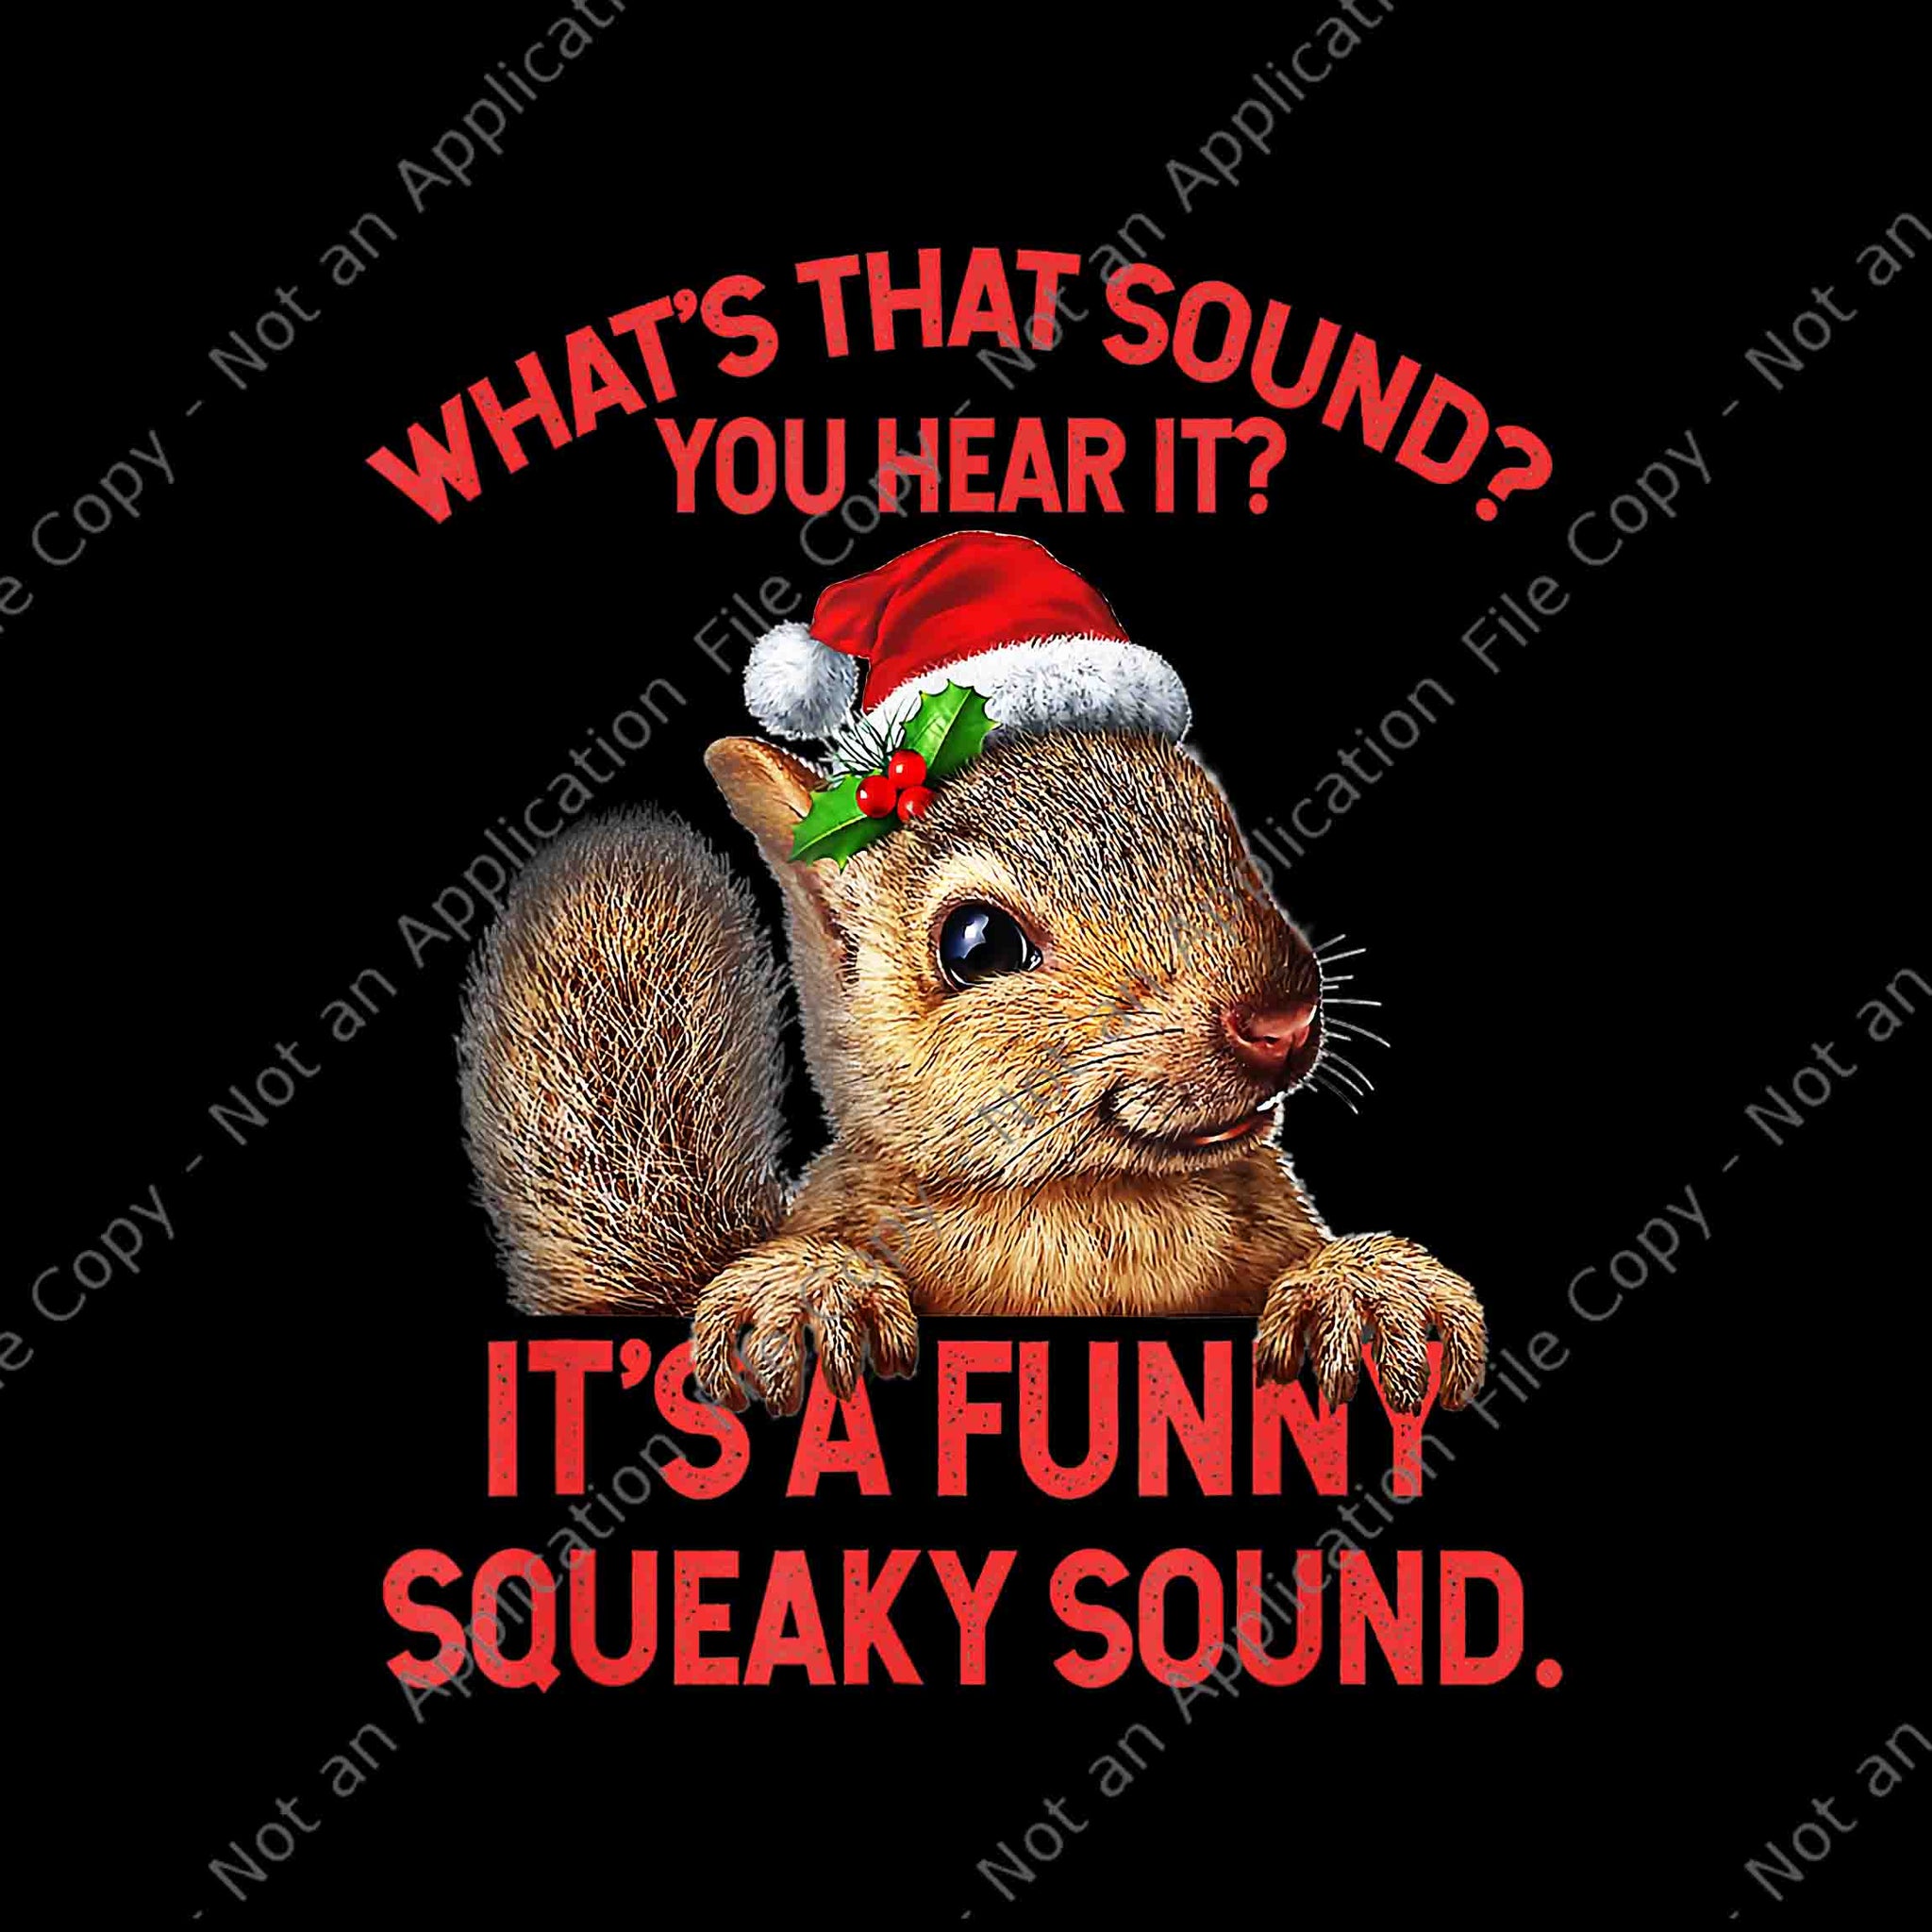 What's That Sound You Hear It Png, It's A Funny Squeaky Sound Christmas Squirrel Xmas Png, Squirrel Christmas Png, Squirrel Hat Santa Png